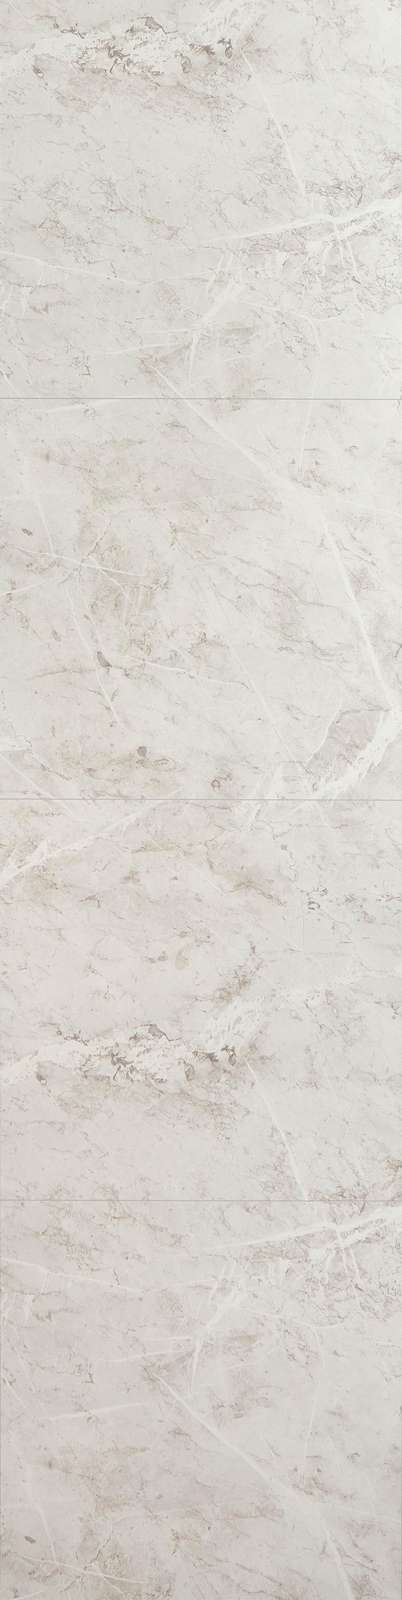 White marble 24 x 24 laminate wall panels - Innovate Building Solutions 